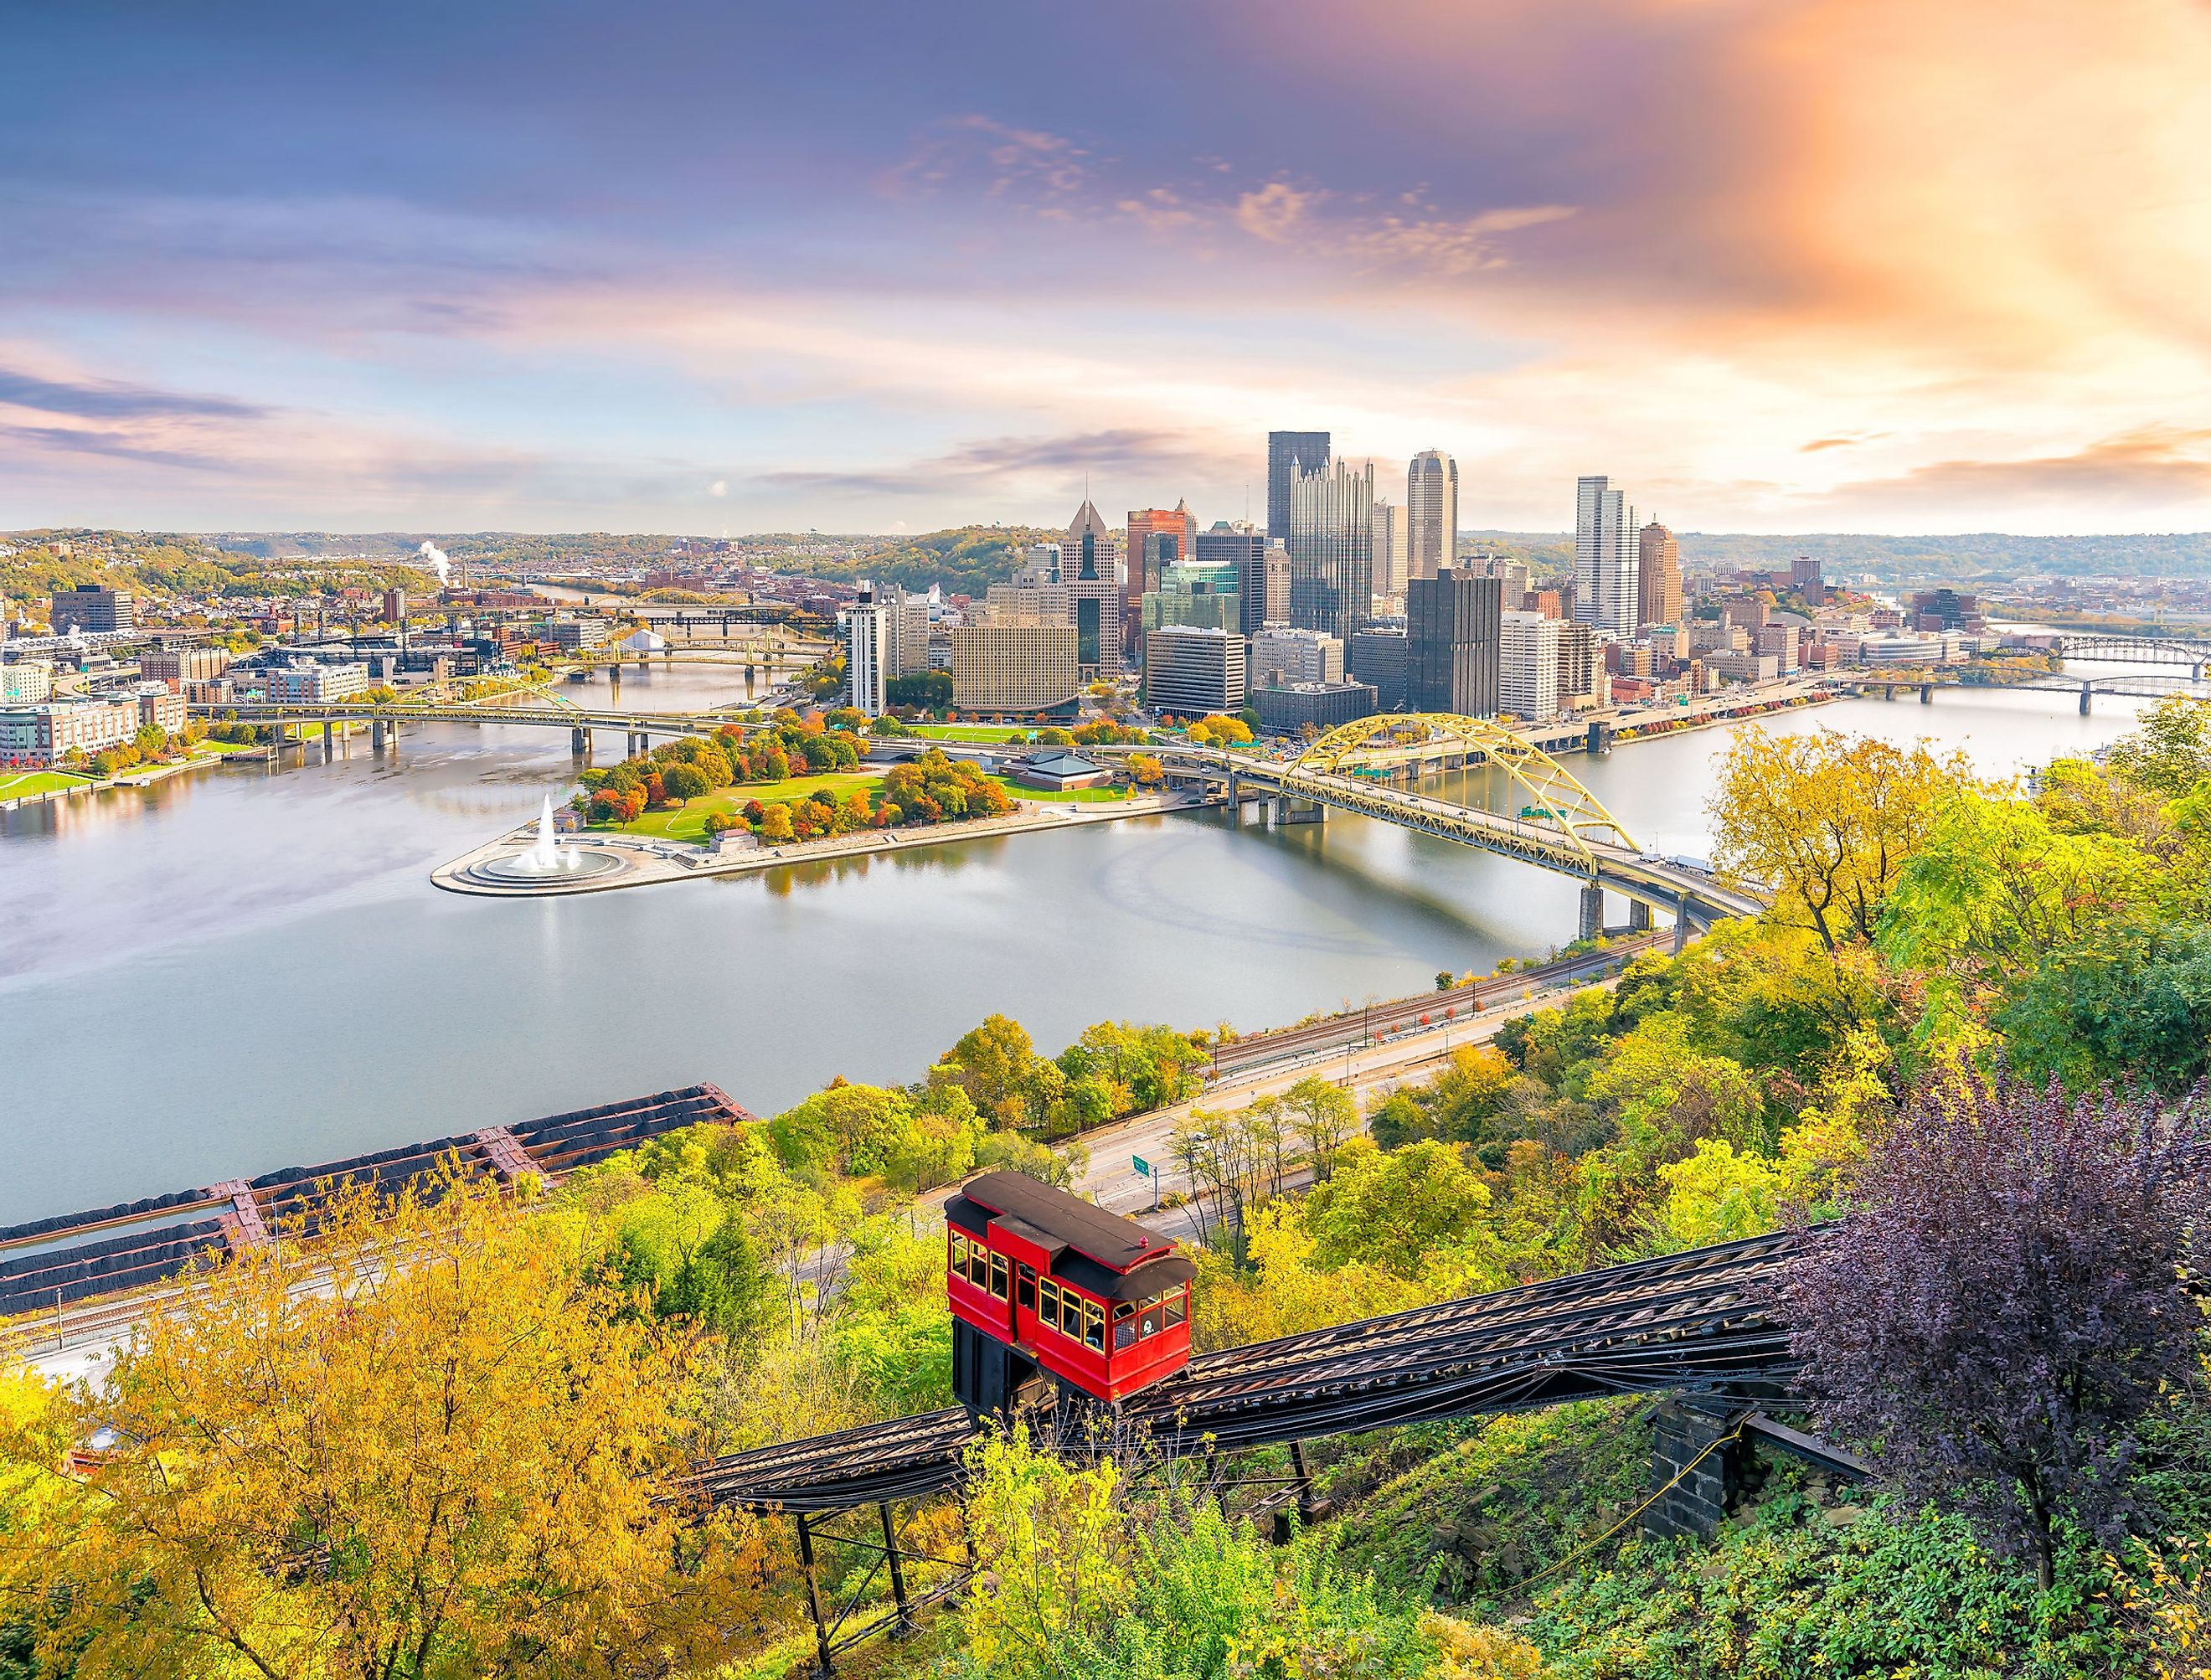 Downtown skyline of Pittsburgh, Pennsylvania at sunset. Image credit f11photo via shutterstock